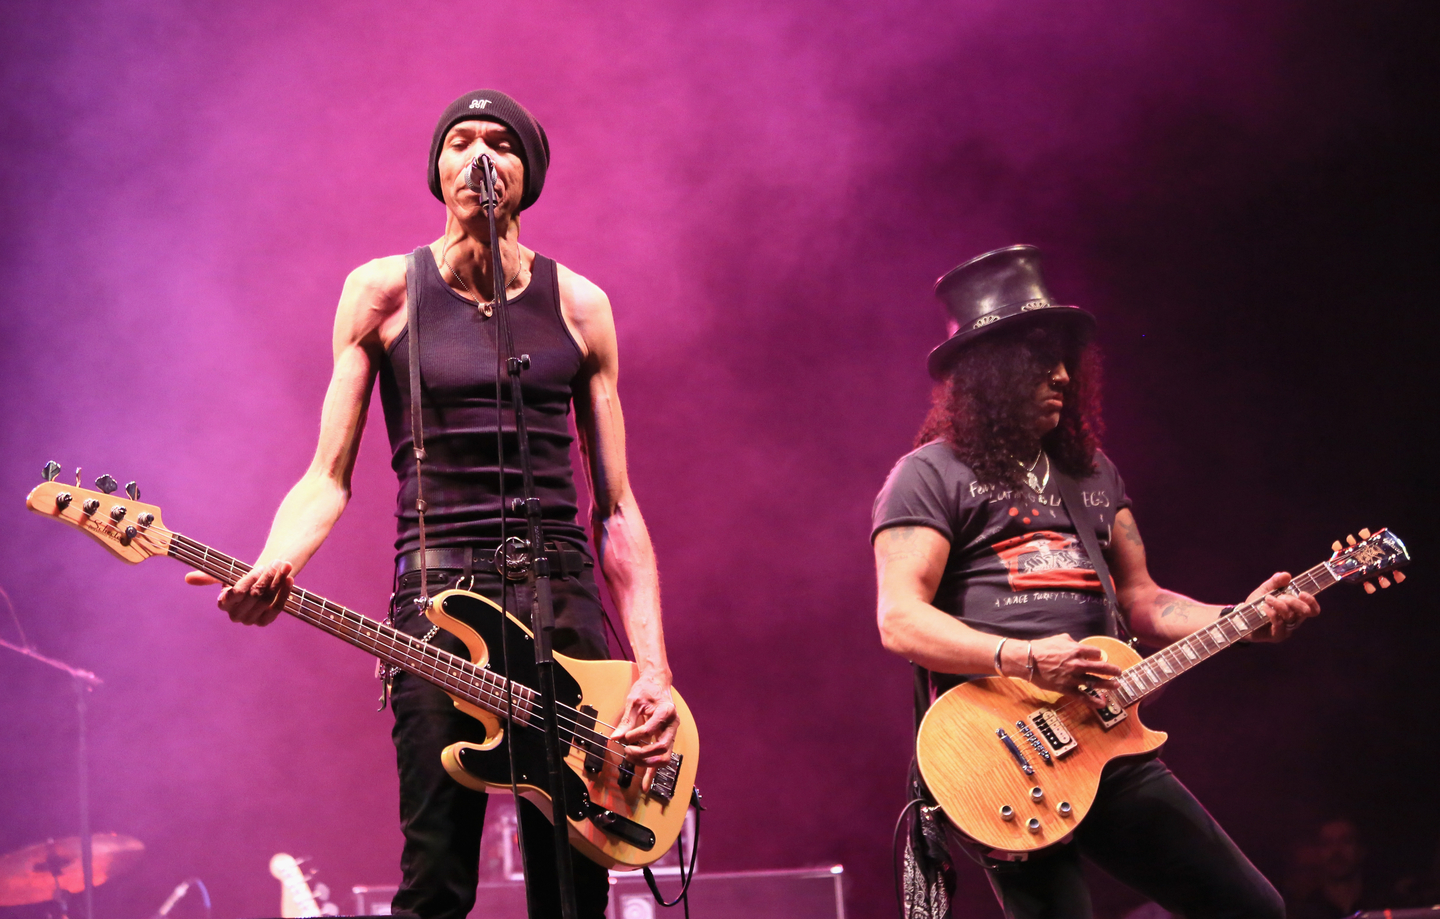 Doug Pinnick and Slash, 2014. Photo by Heather Kennedy/Getty Images for SXSW